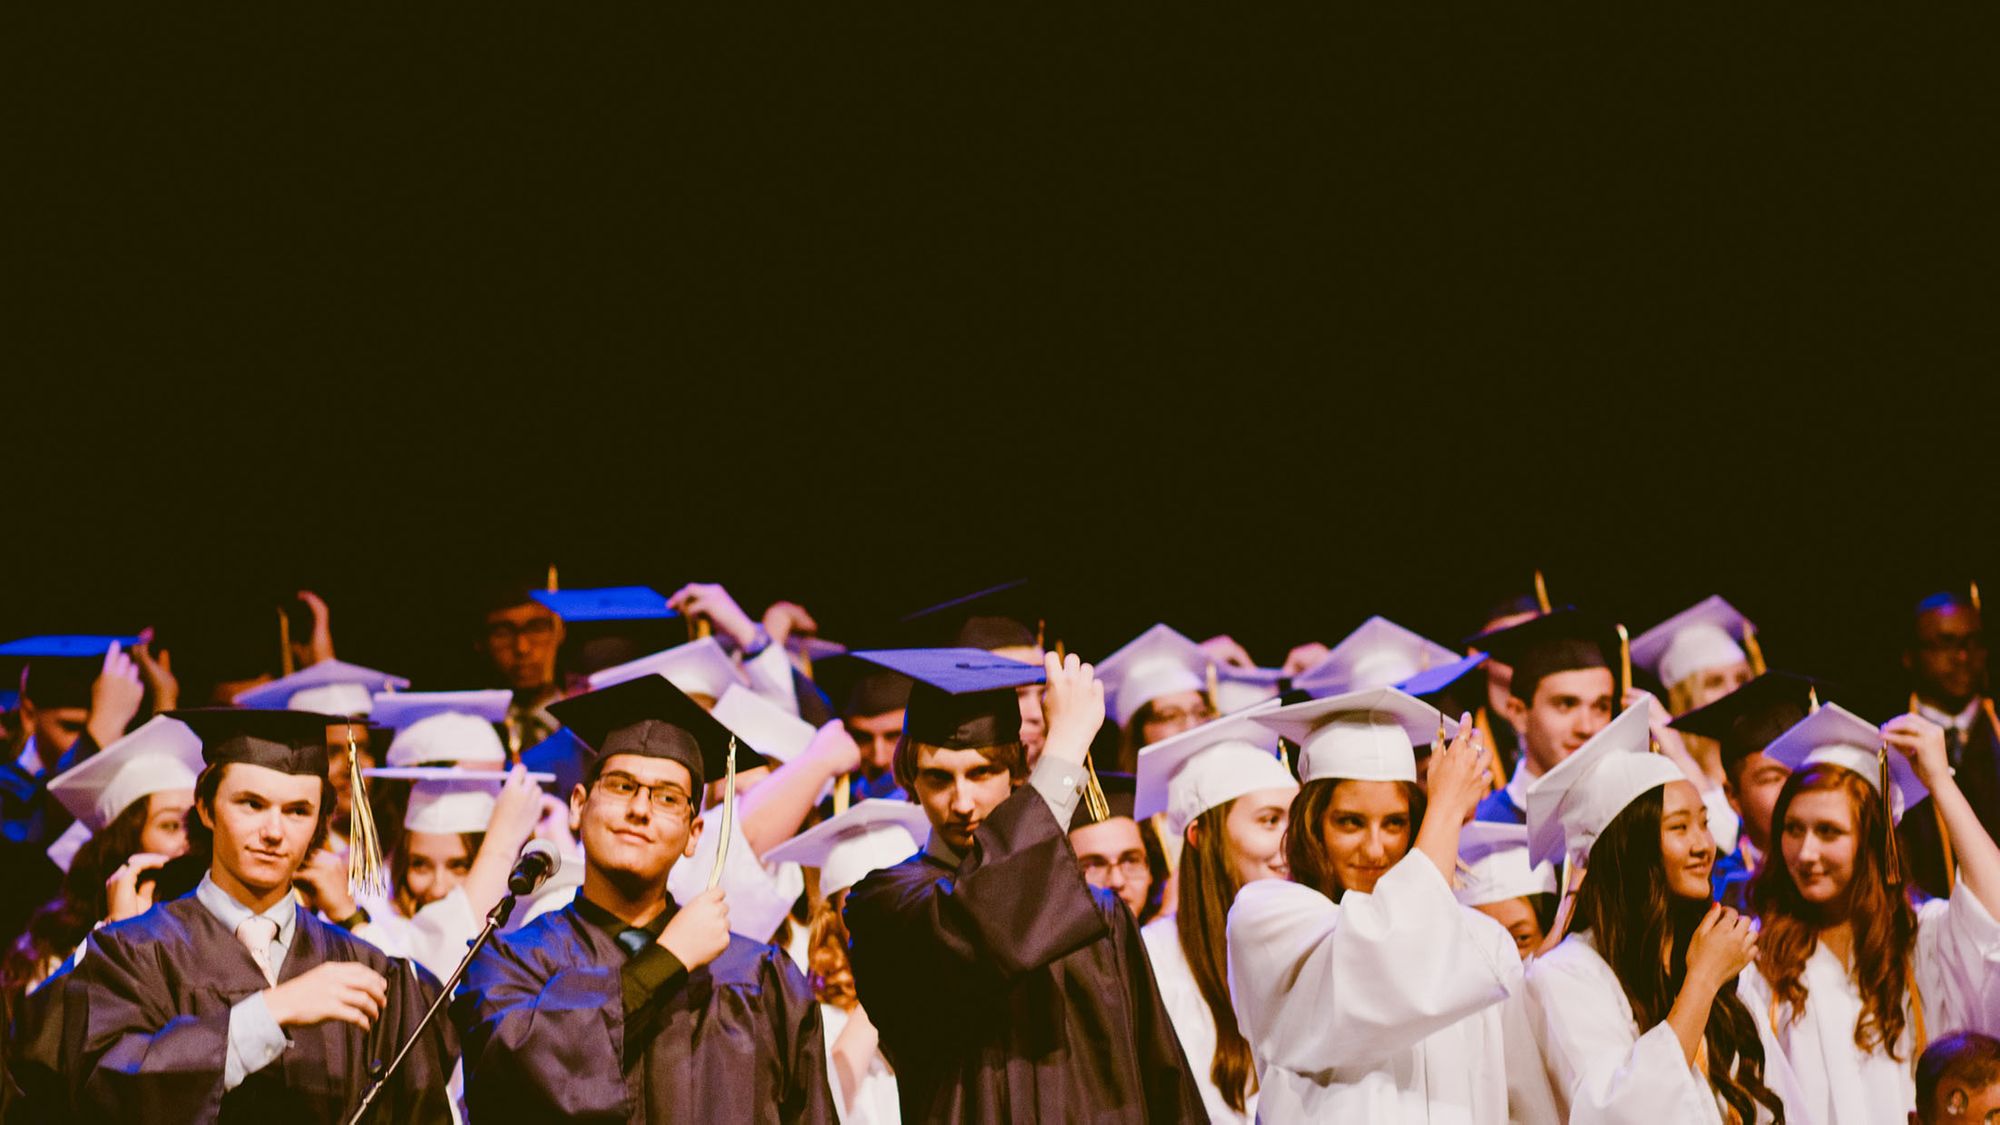 4 Tips For Hiring and Retaining Graduates